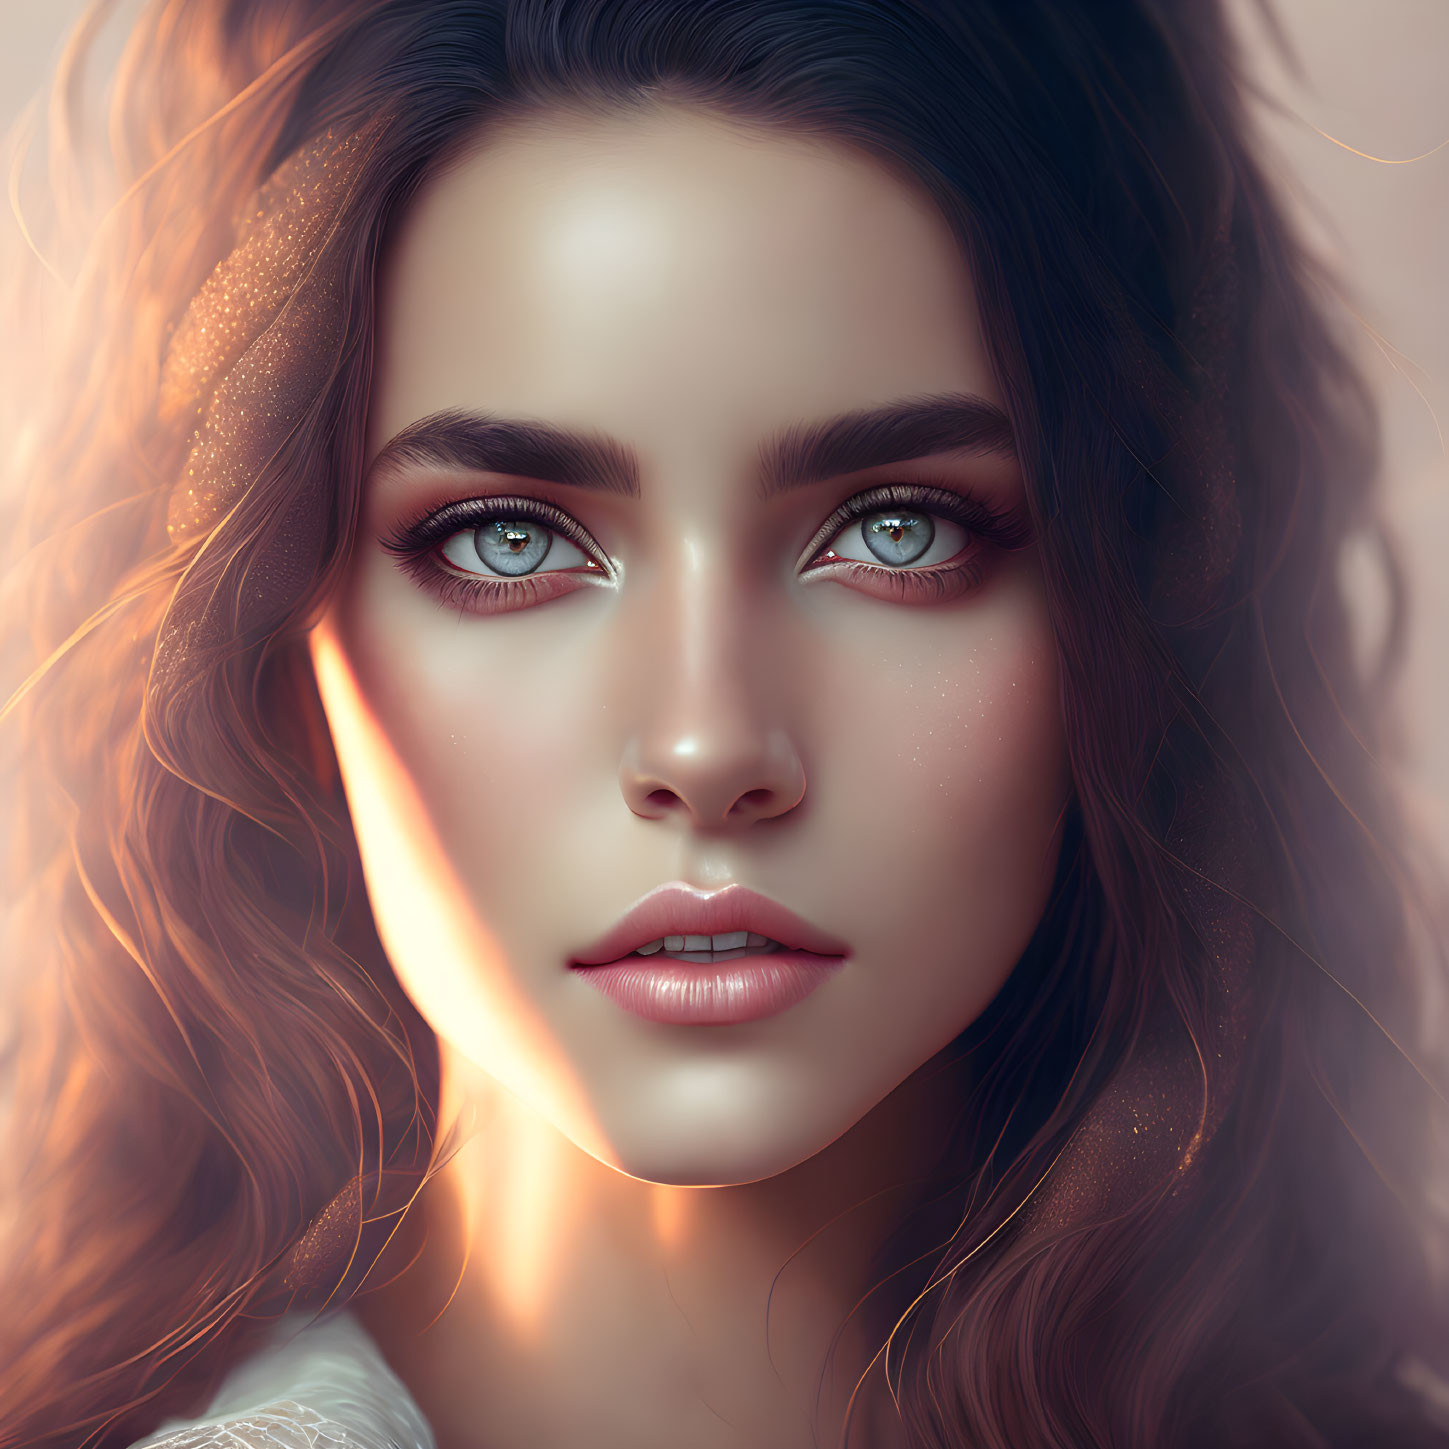 Portrait of a woman with green eyes and wavy hair in warm sunlight